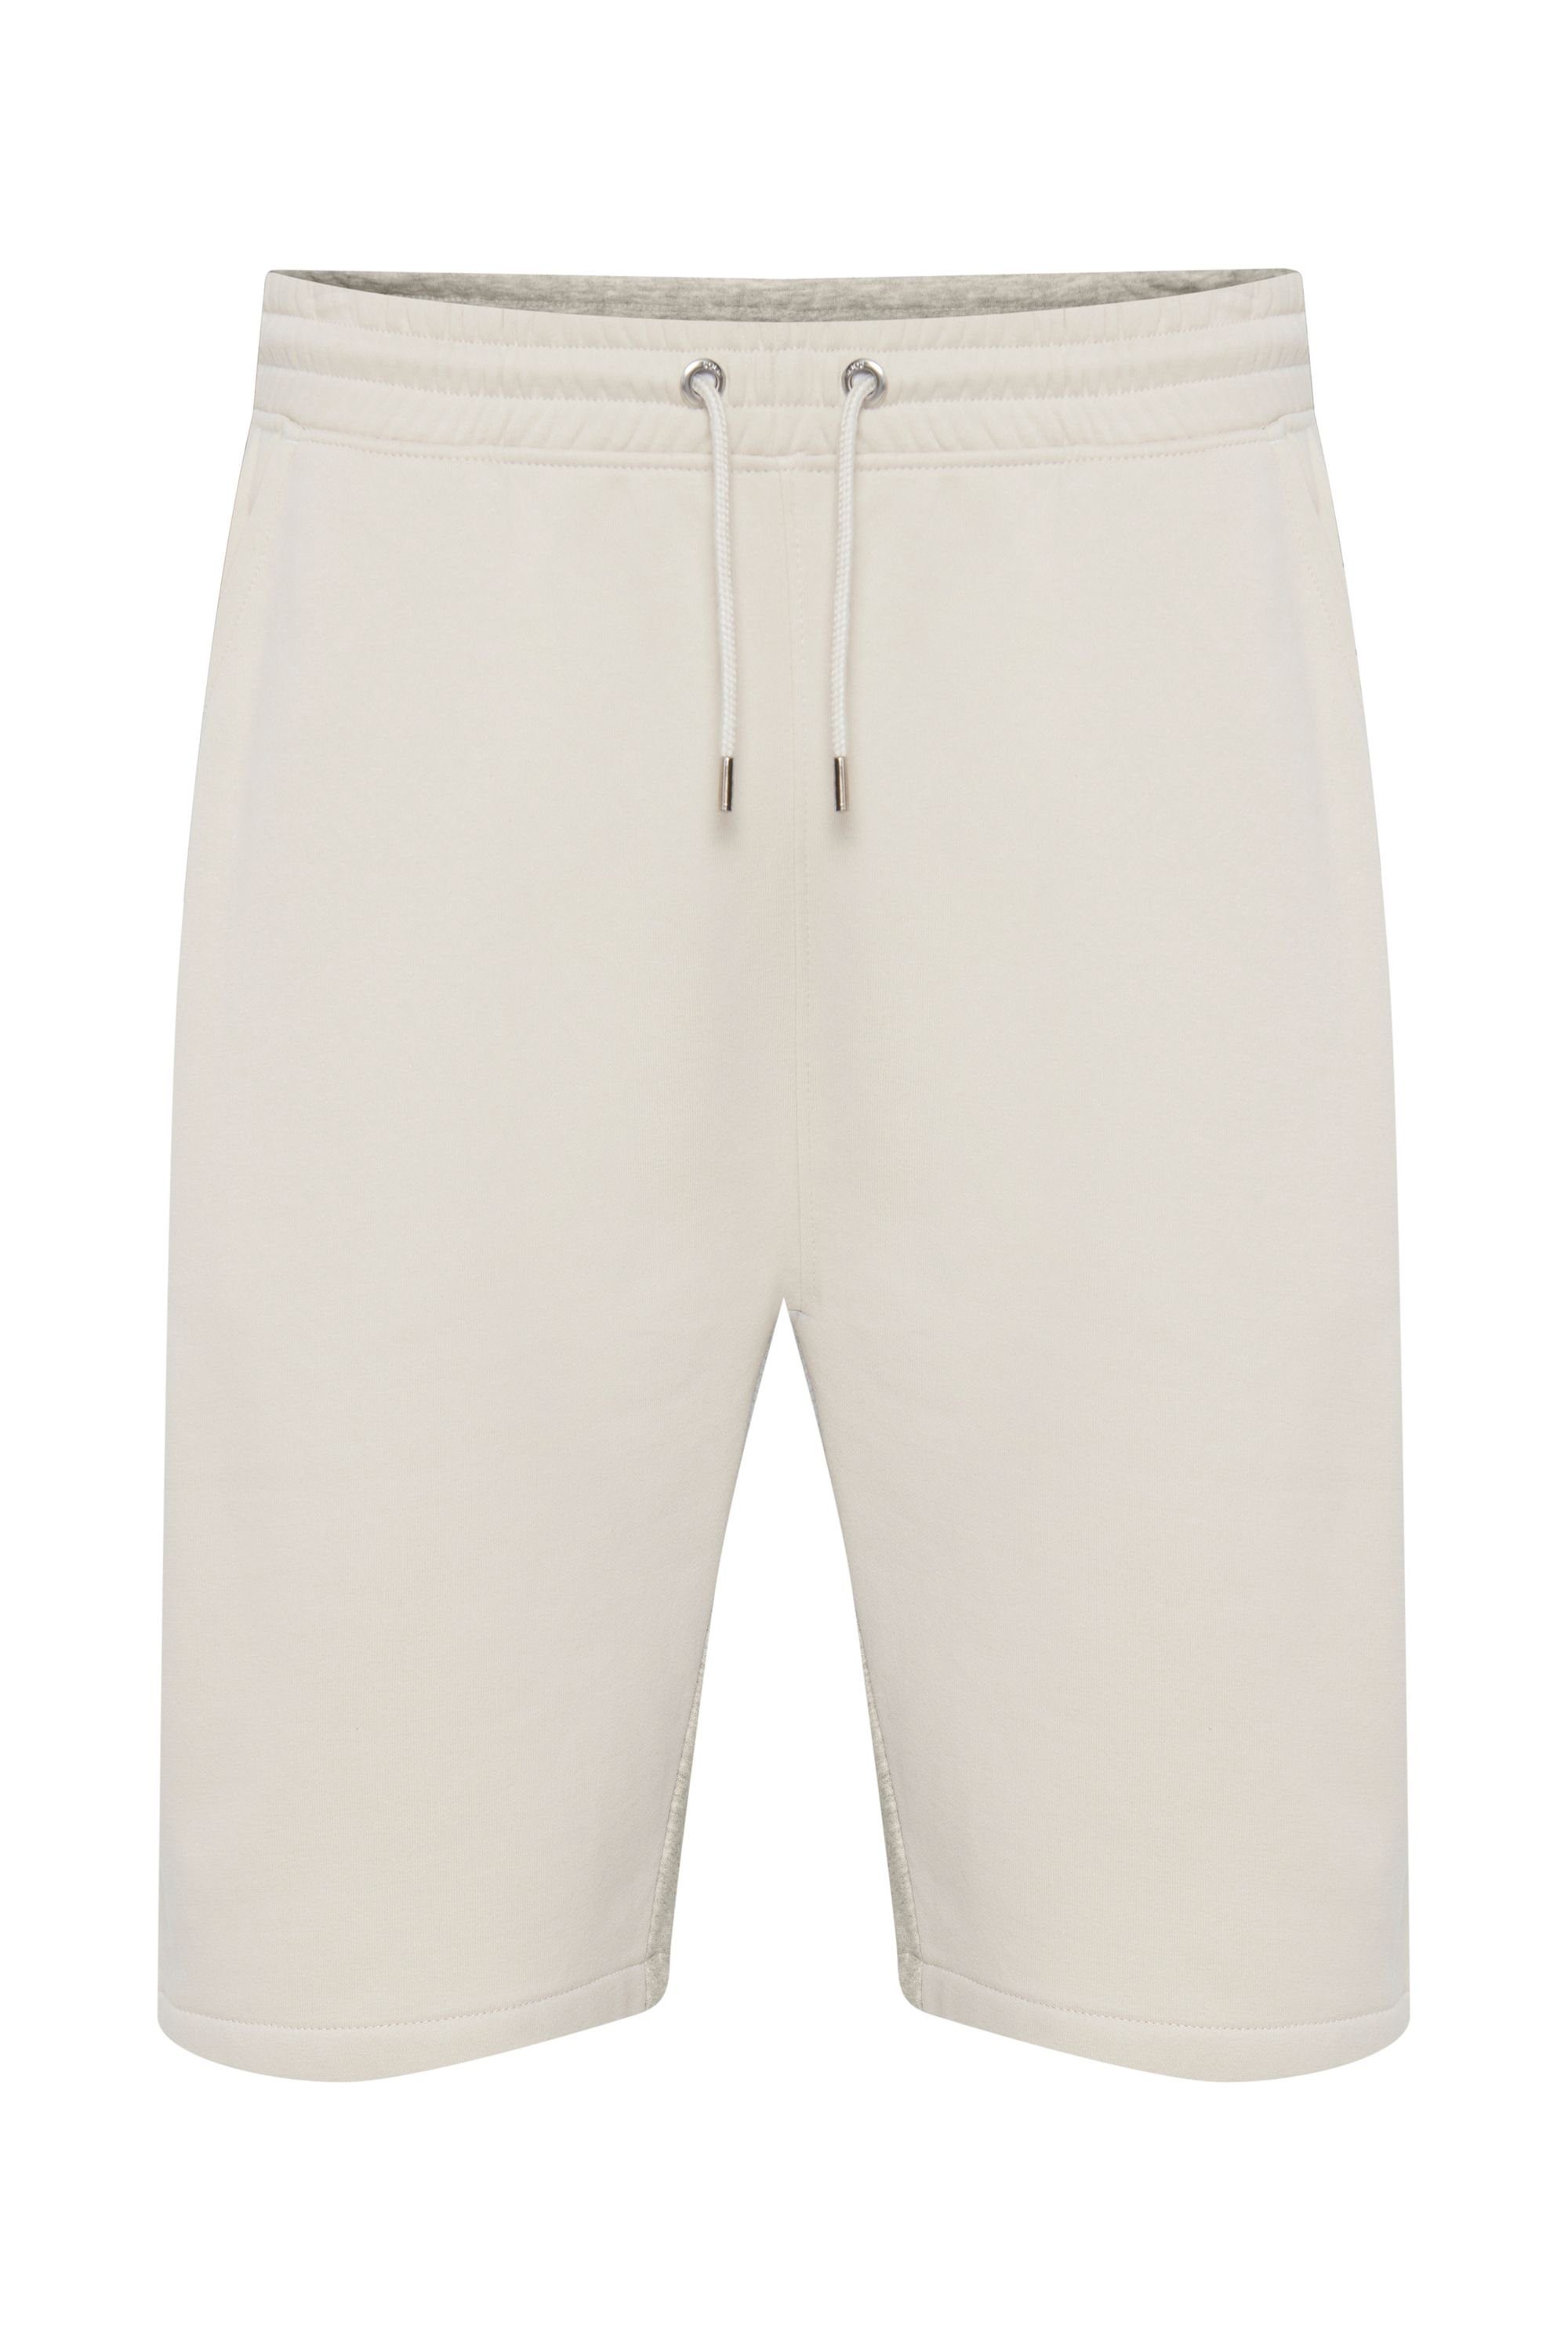 OATMEAL SDBrenden !Solid (130401) SHO - 21106991 Relaxshorts